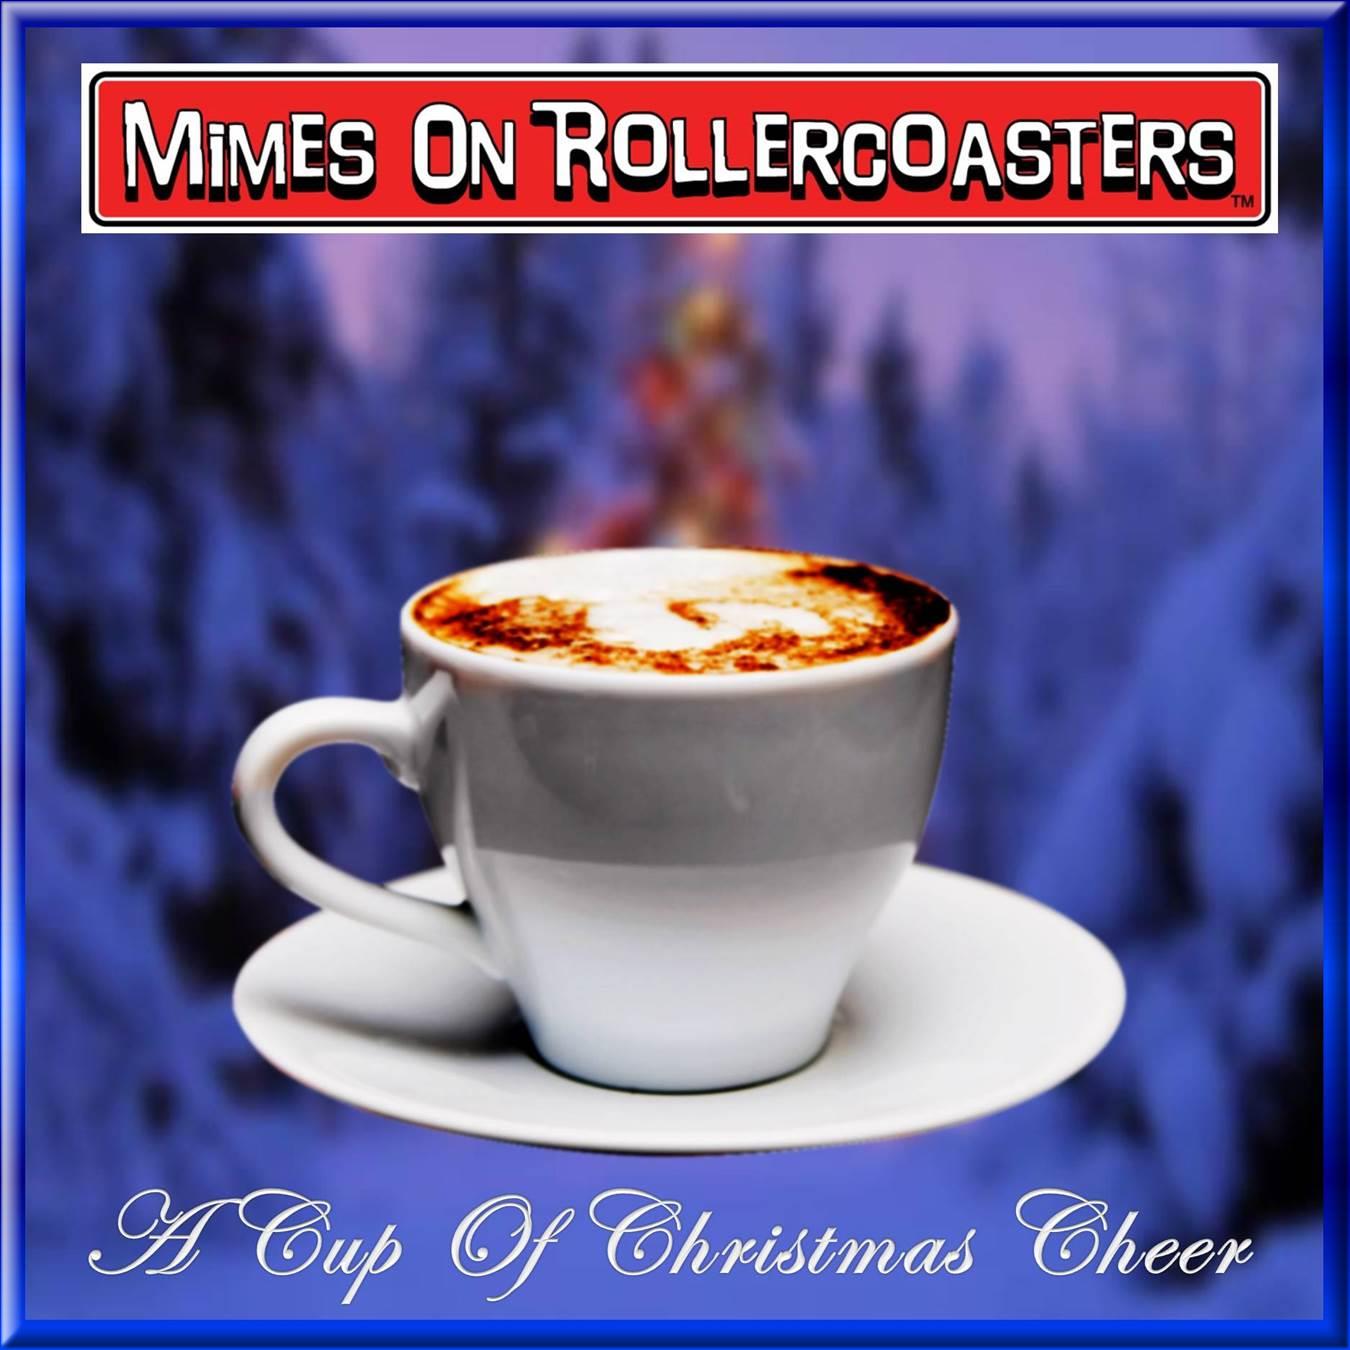 Mimes On Rollercoasters™ - A Cup Of Christmas Cheer